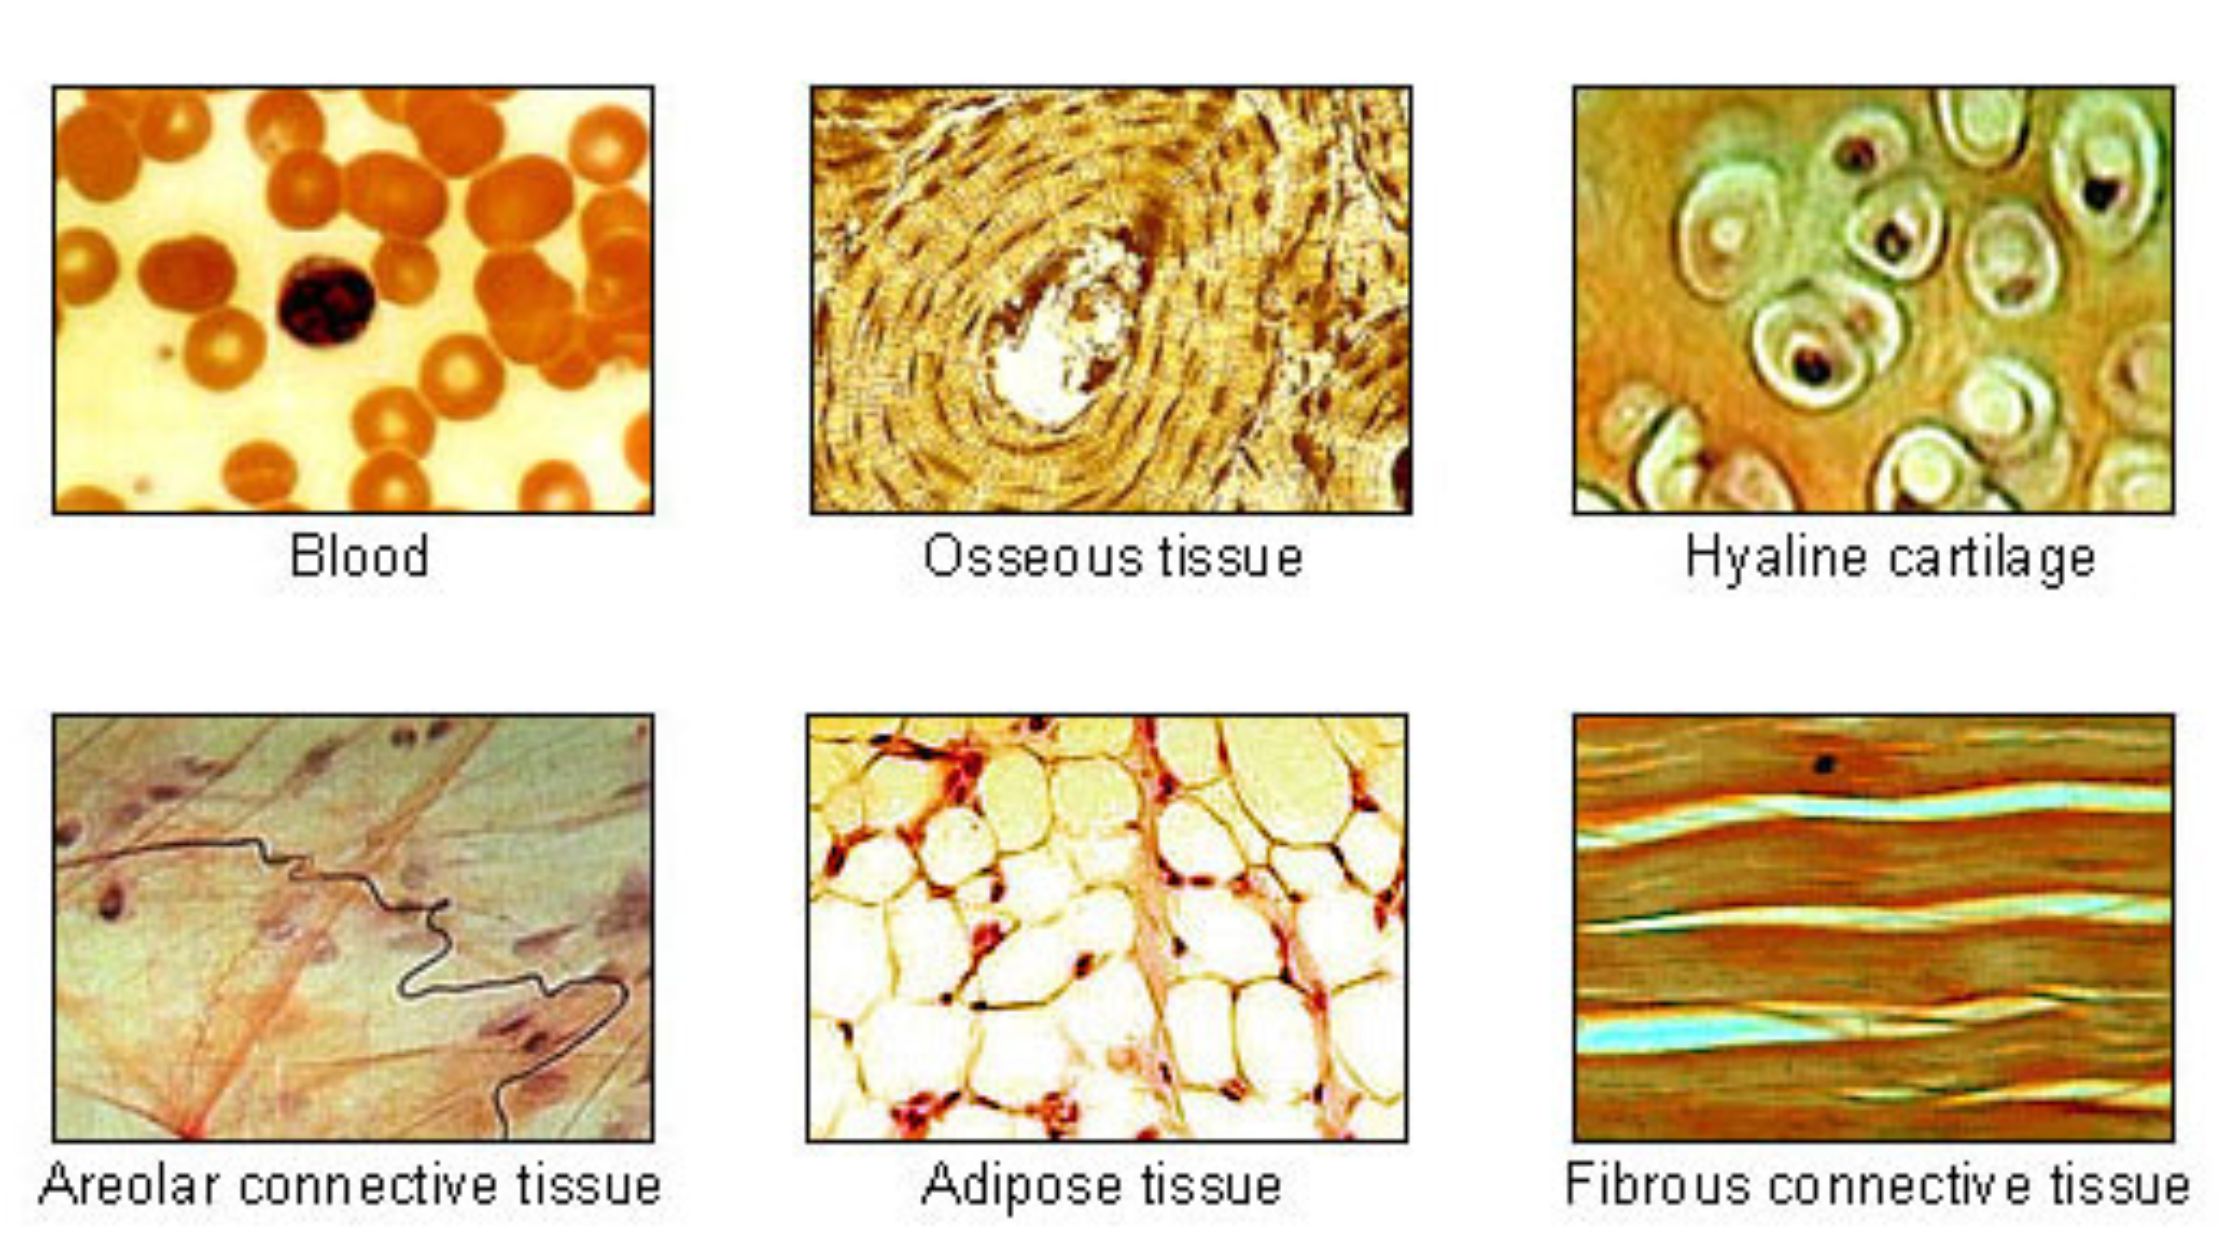 Connective tissue - Structure, Location, Function and Classification